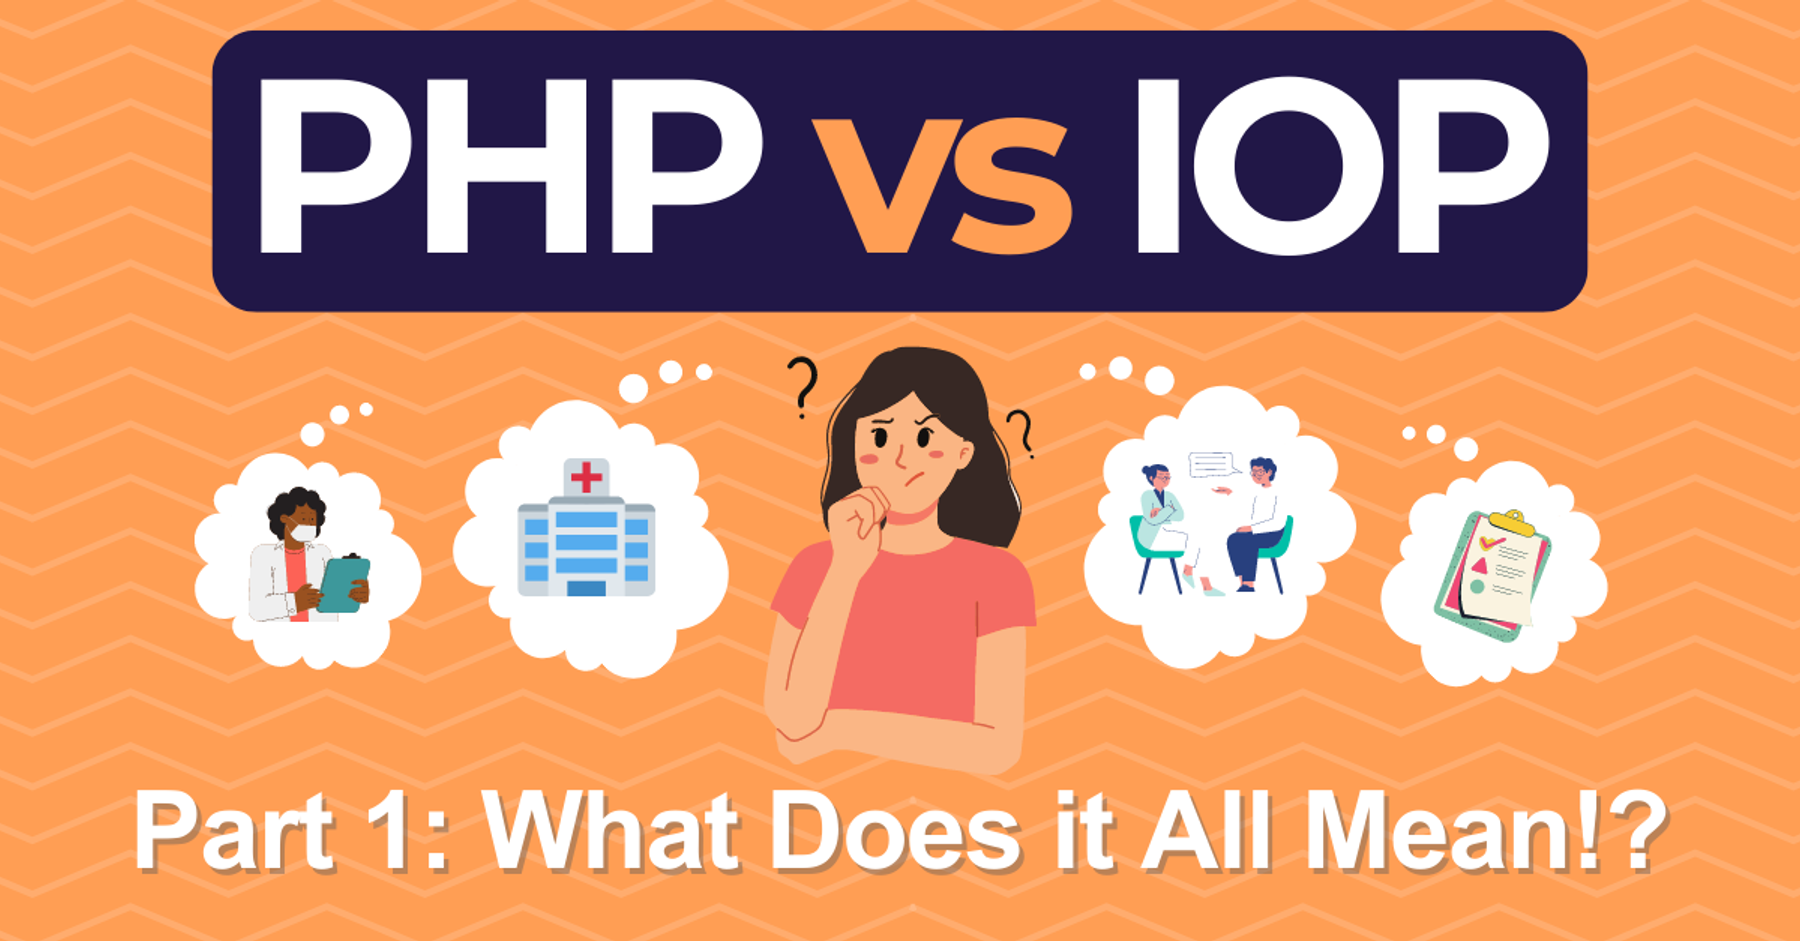 PHP vs IOP Part 1: What does it all mean!?